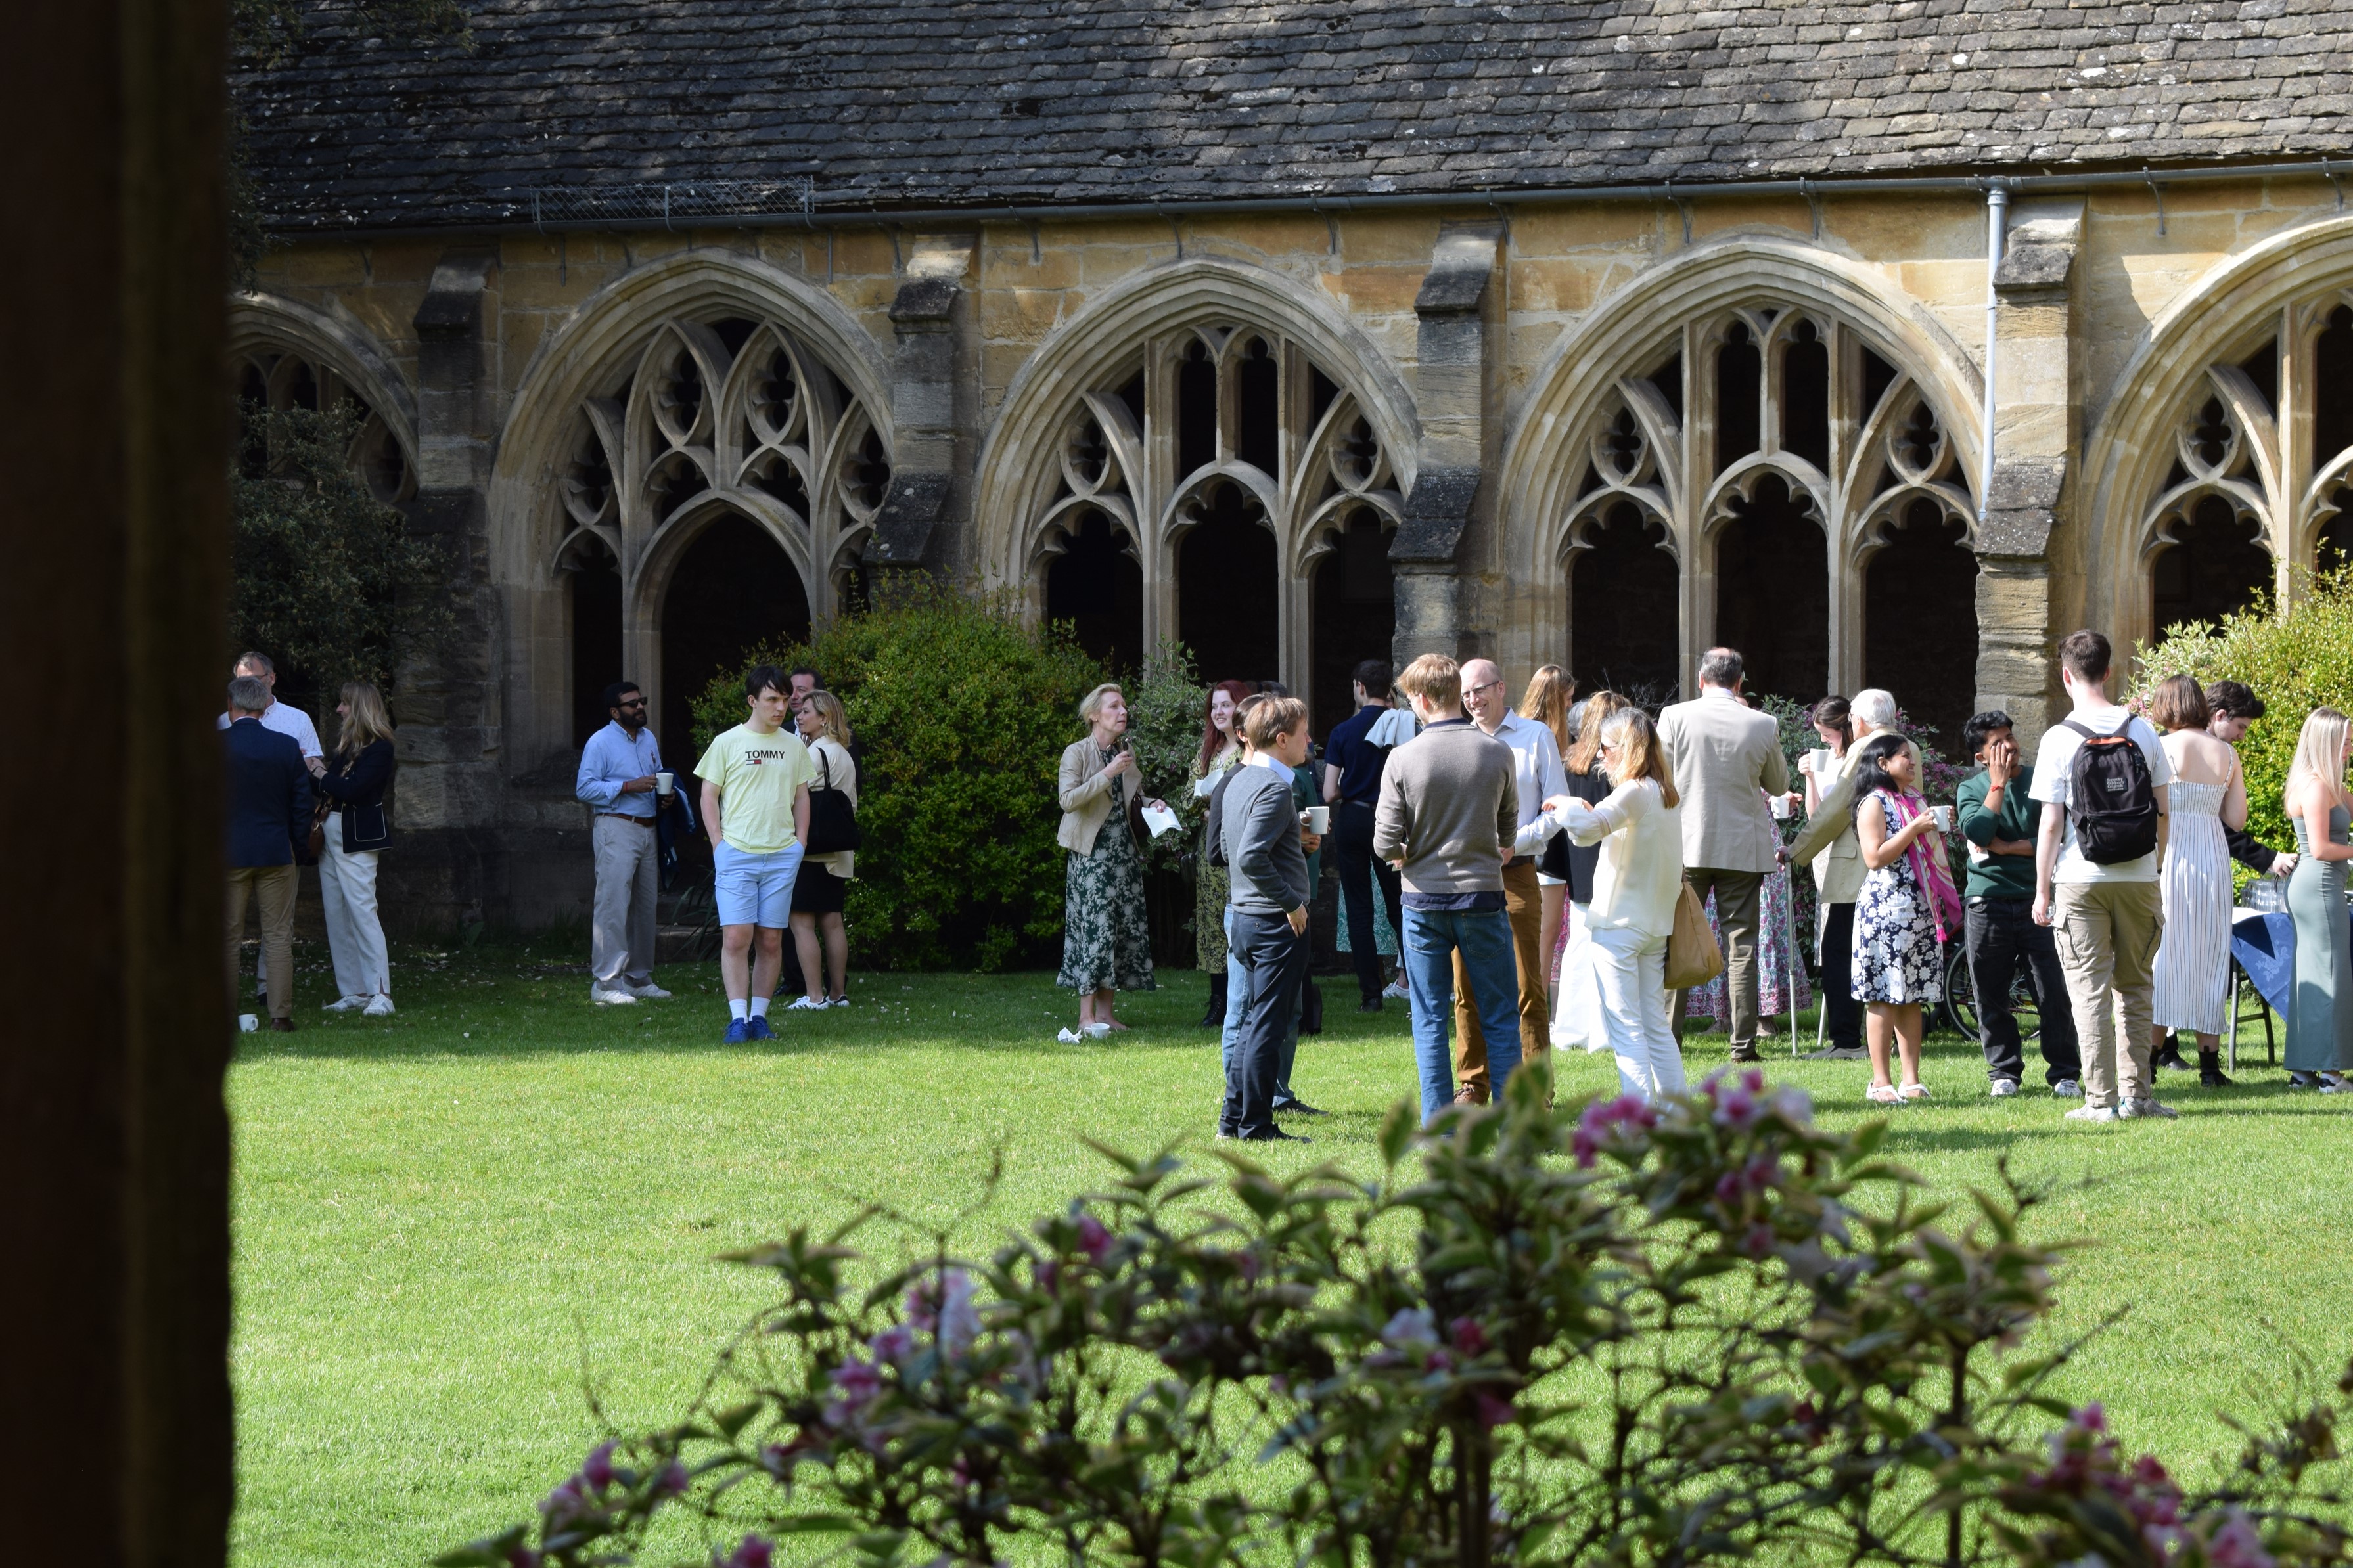 Guests gather in the cloisters on Parents' Day